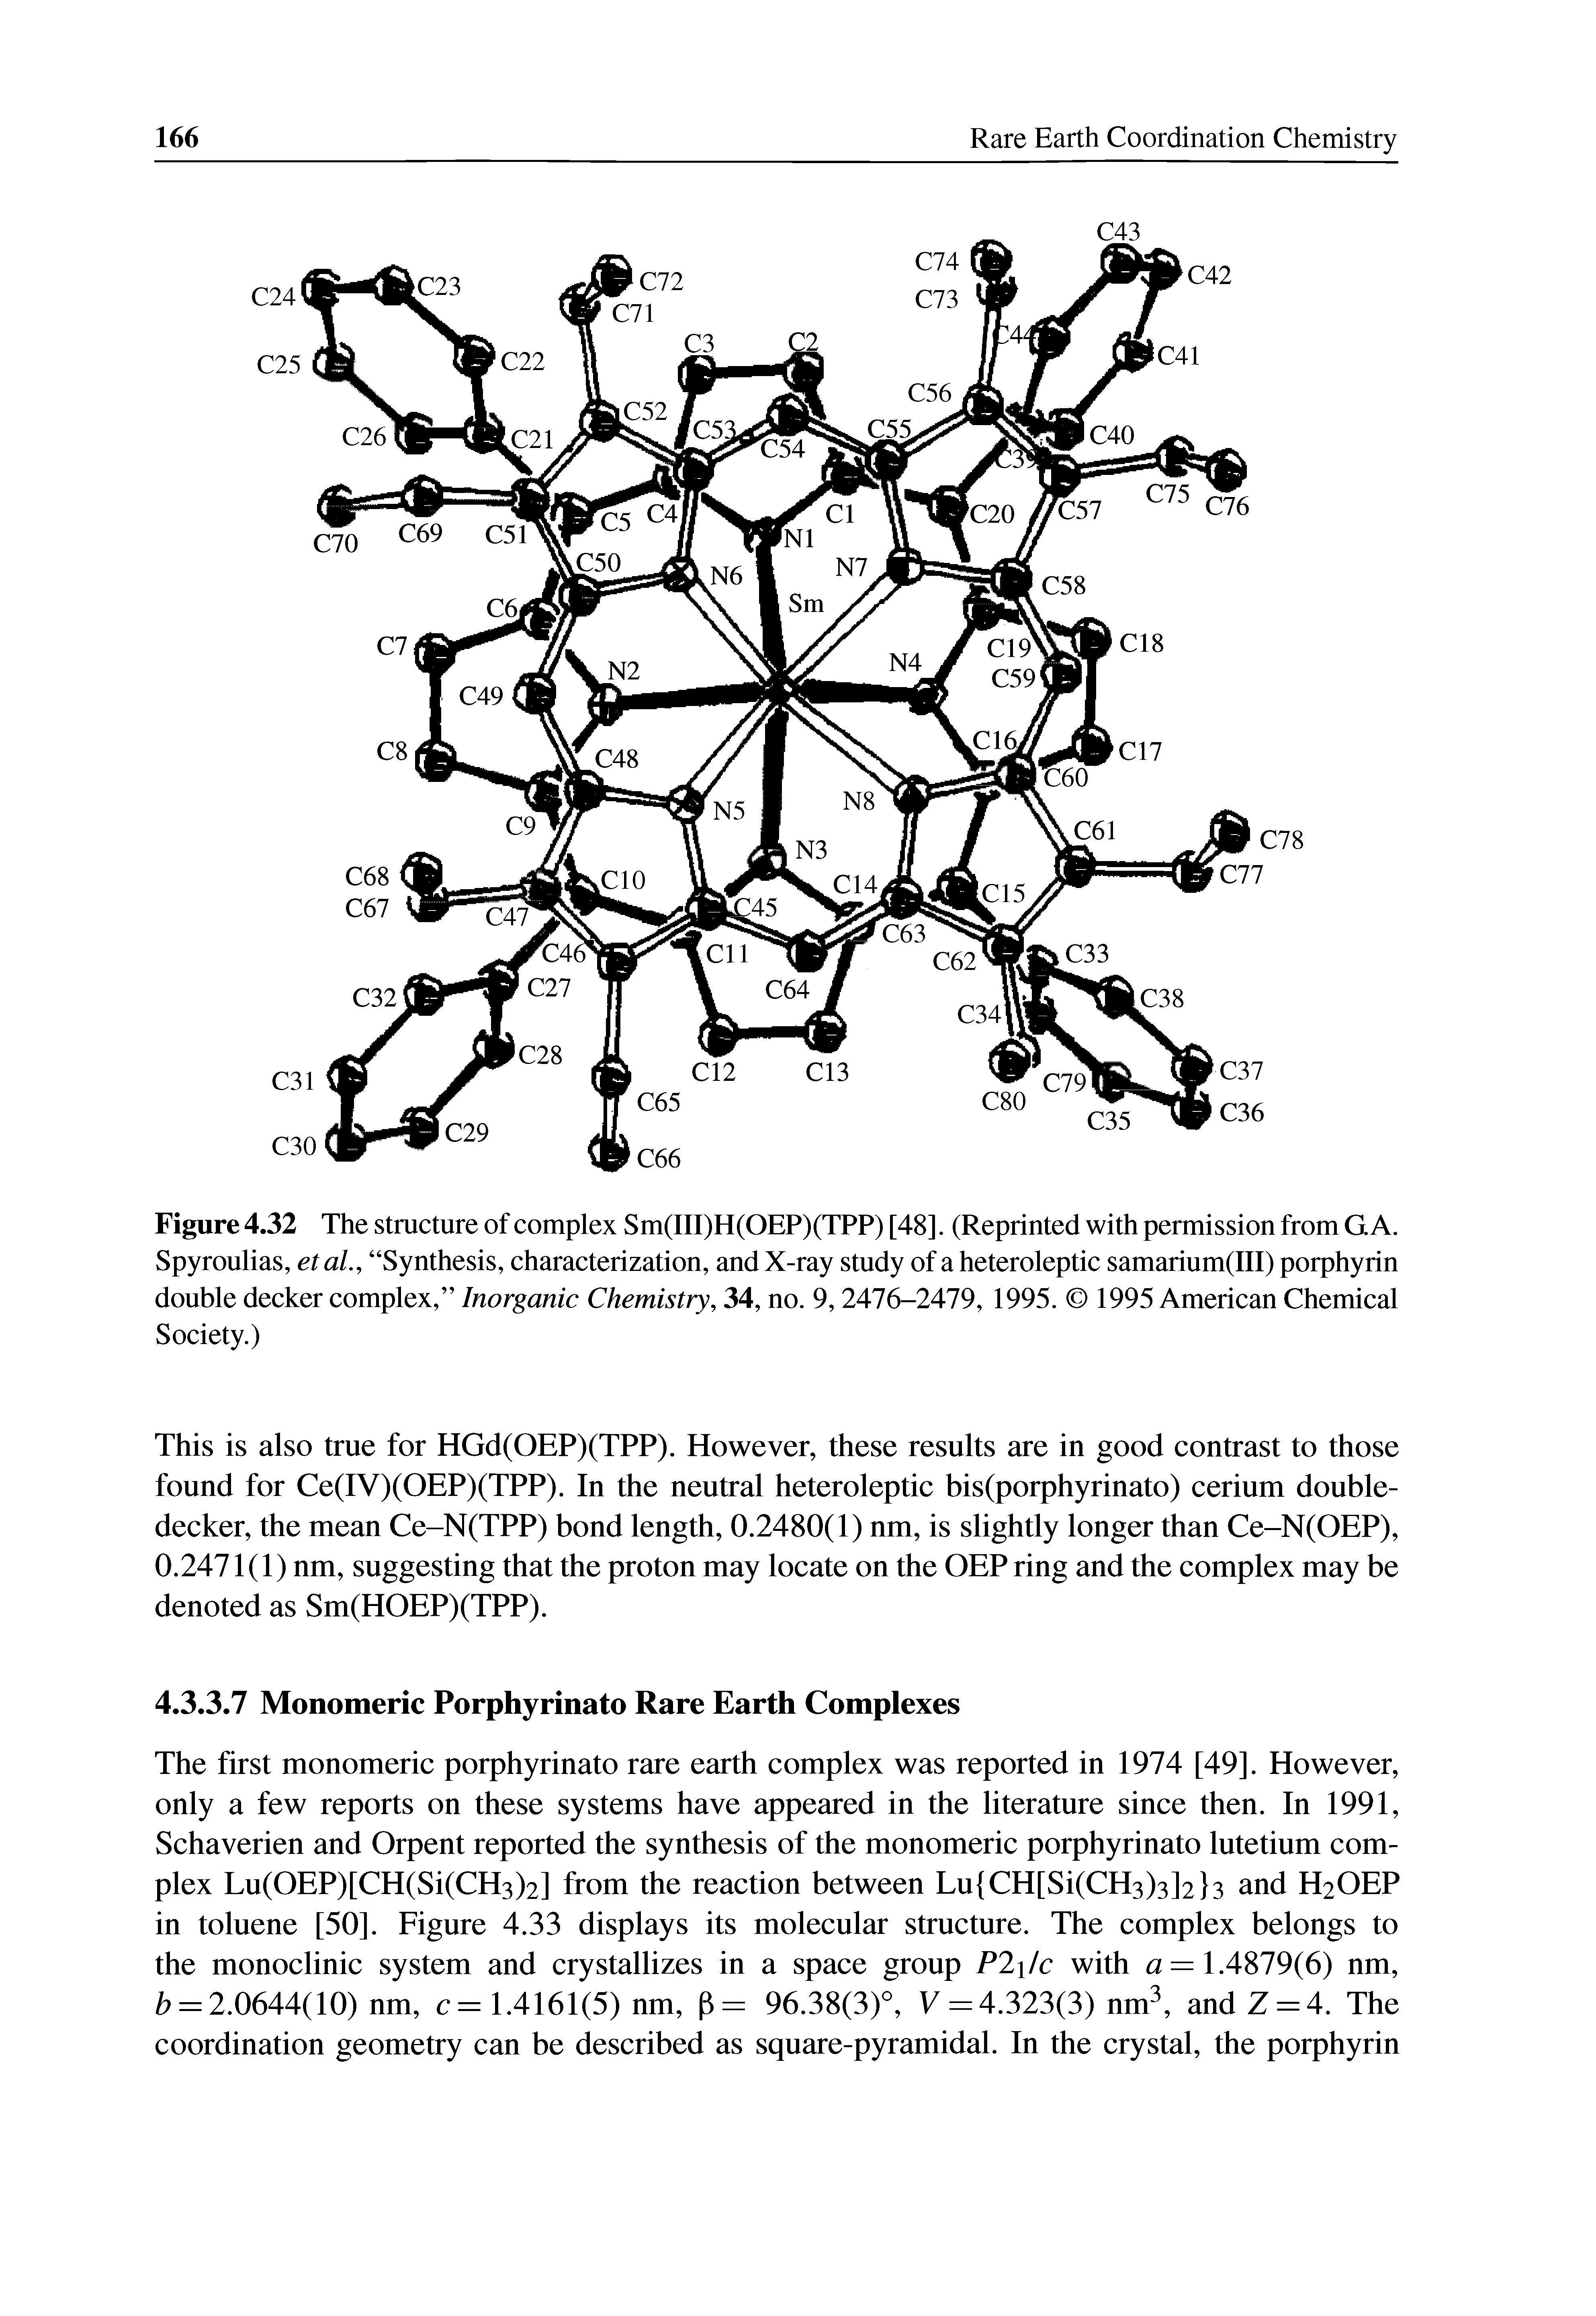 Figure 4.32 The structure of complex Sm(III)H(OEP)(TPP) [48]. (Reprinted with permission from G. A. Spyroulias, etah, Synthesis, characterization, and X-ray study of a heteroleptic samarium(III) porphyrin double decker complex, Inorganic Chemistry, 34, no. 9,2476-2479, 1995. 1995 American Chemical Society.)...